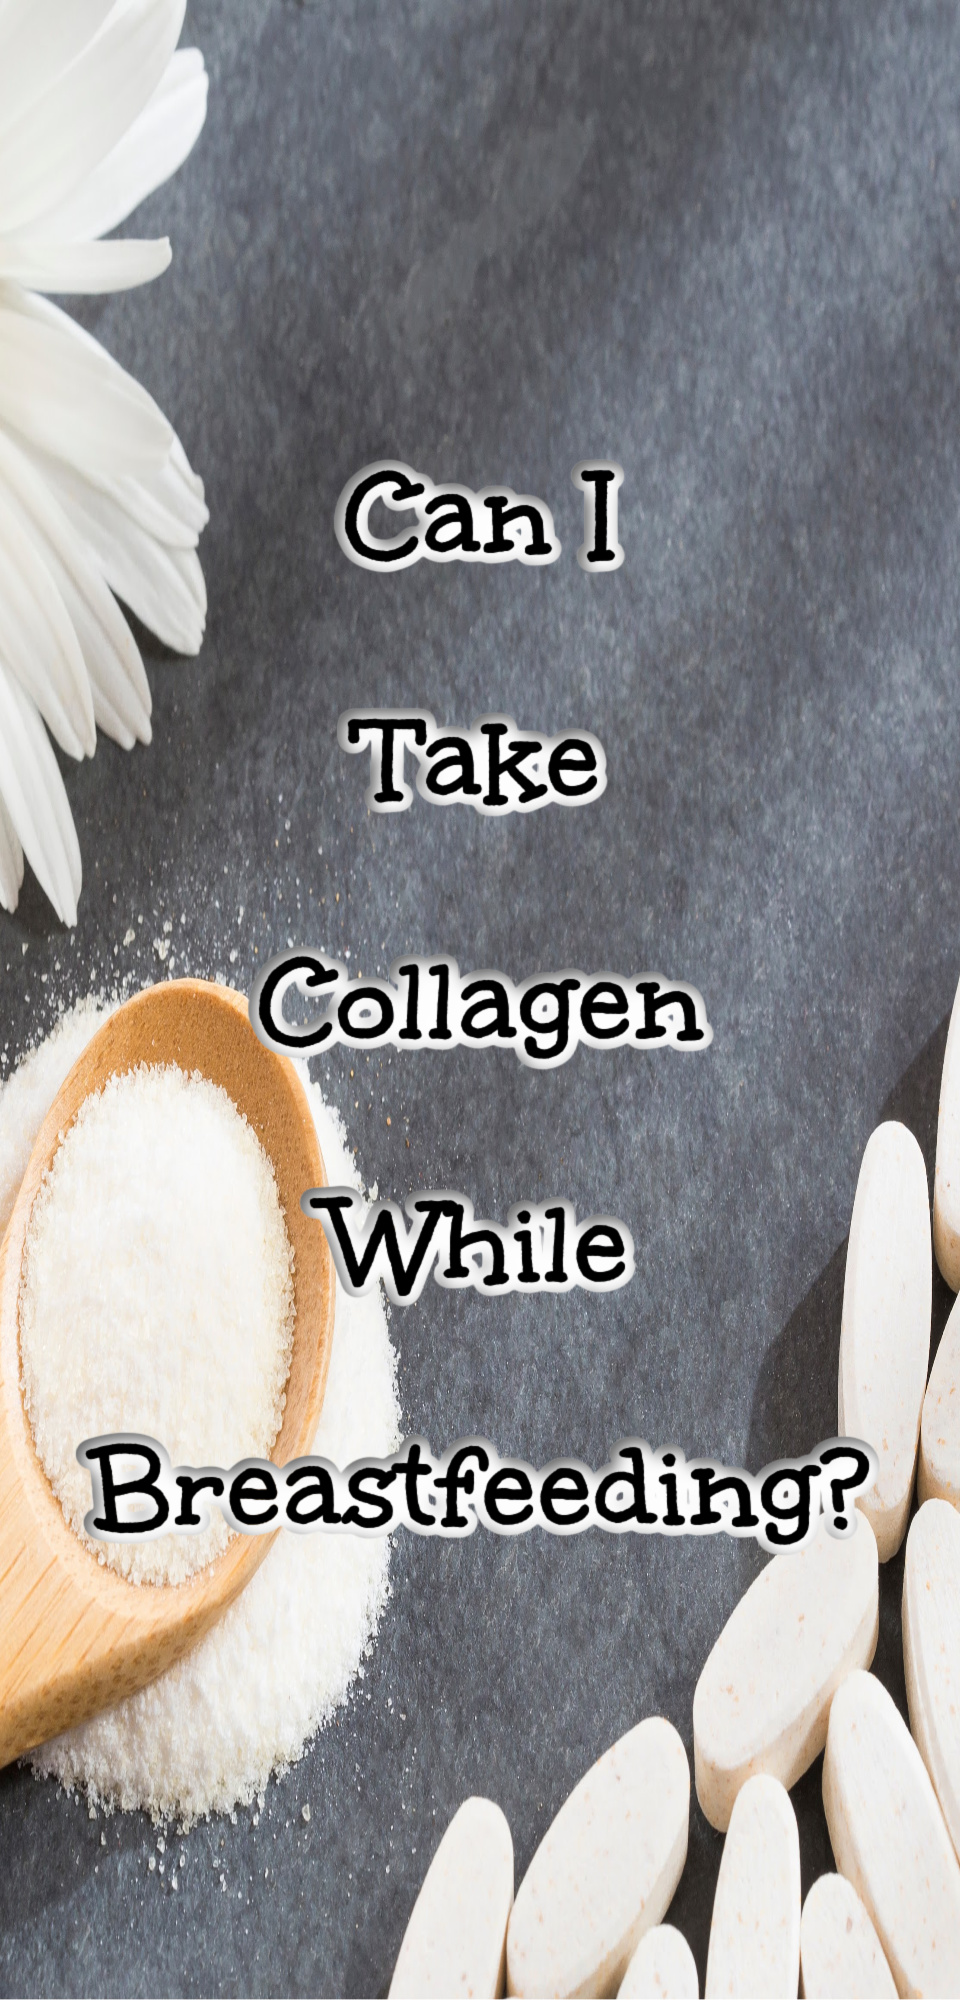 Can I Take Collagen While Breastfeeding?